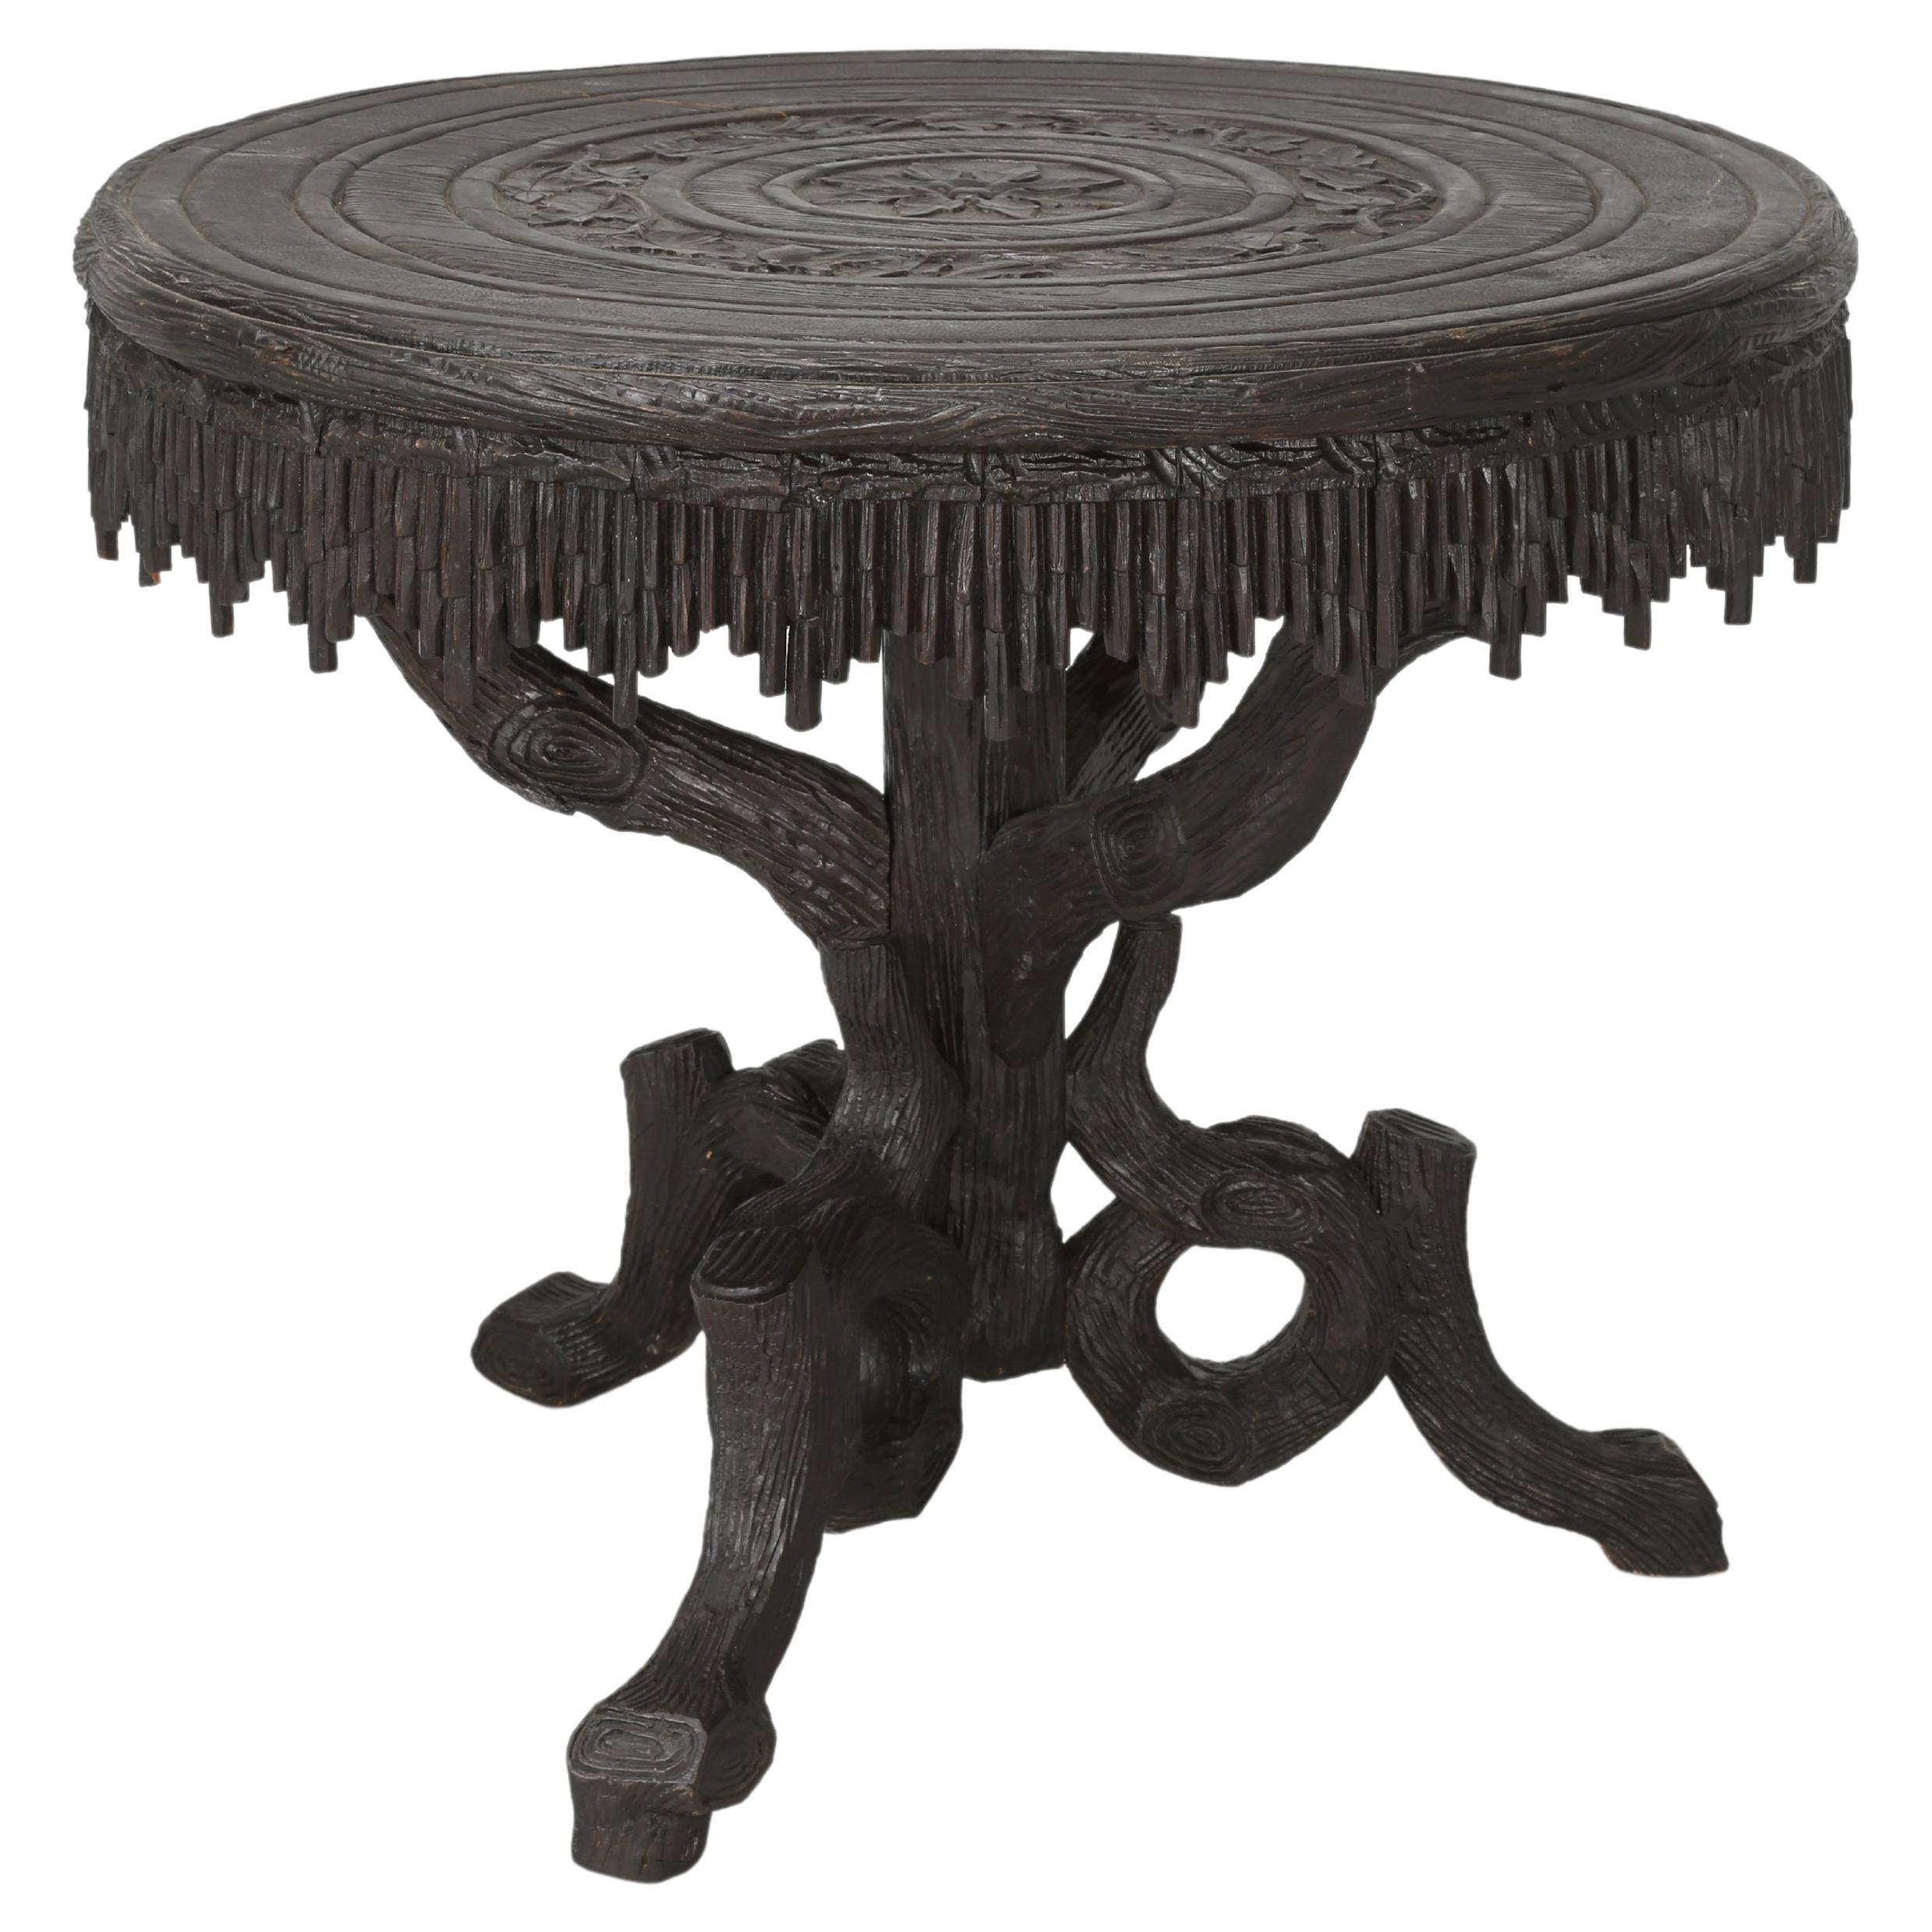 Antique Black Forest Game Table, Center Hall Table Dining Table circa late 1800s